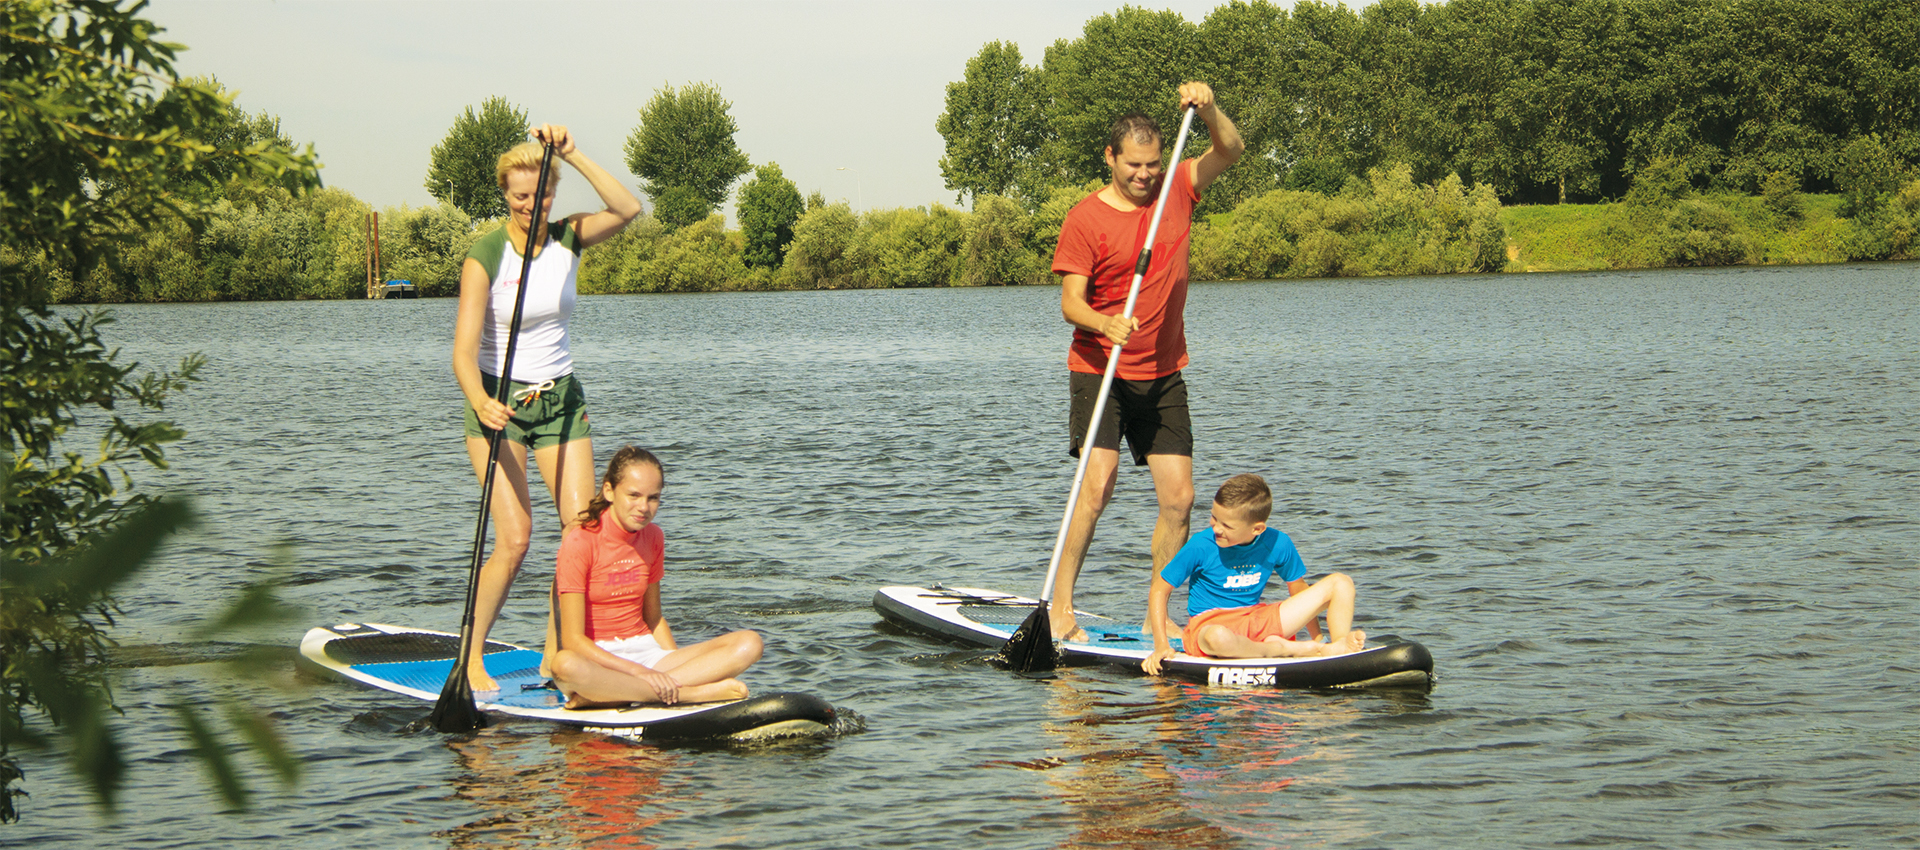 Whatever your style is, weve got the perfect SUP for you!